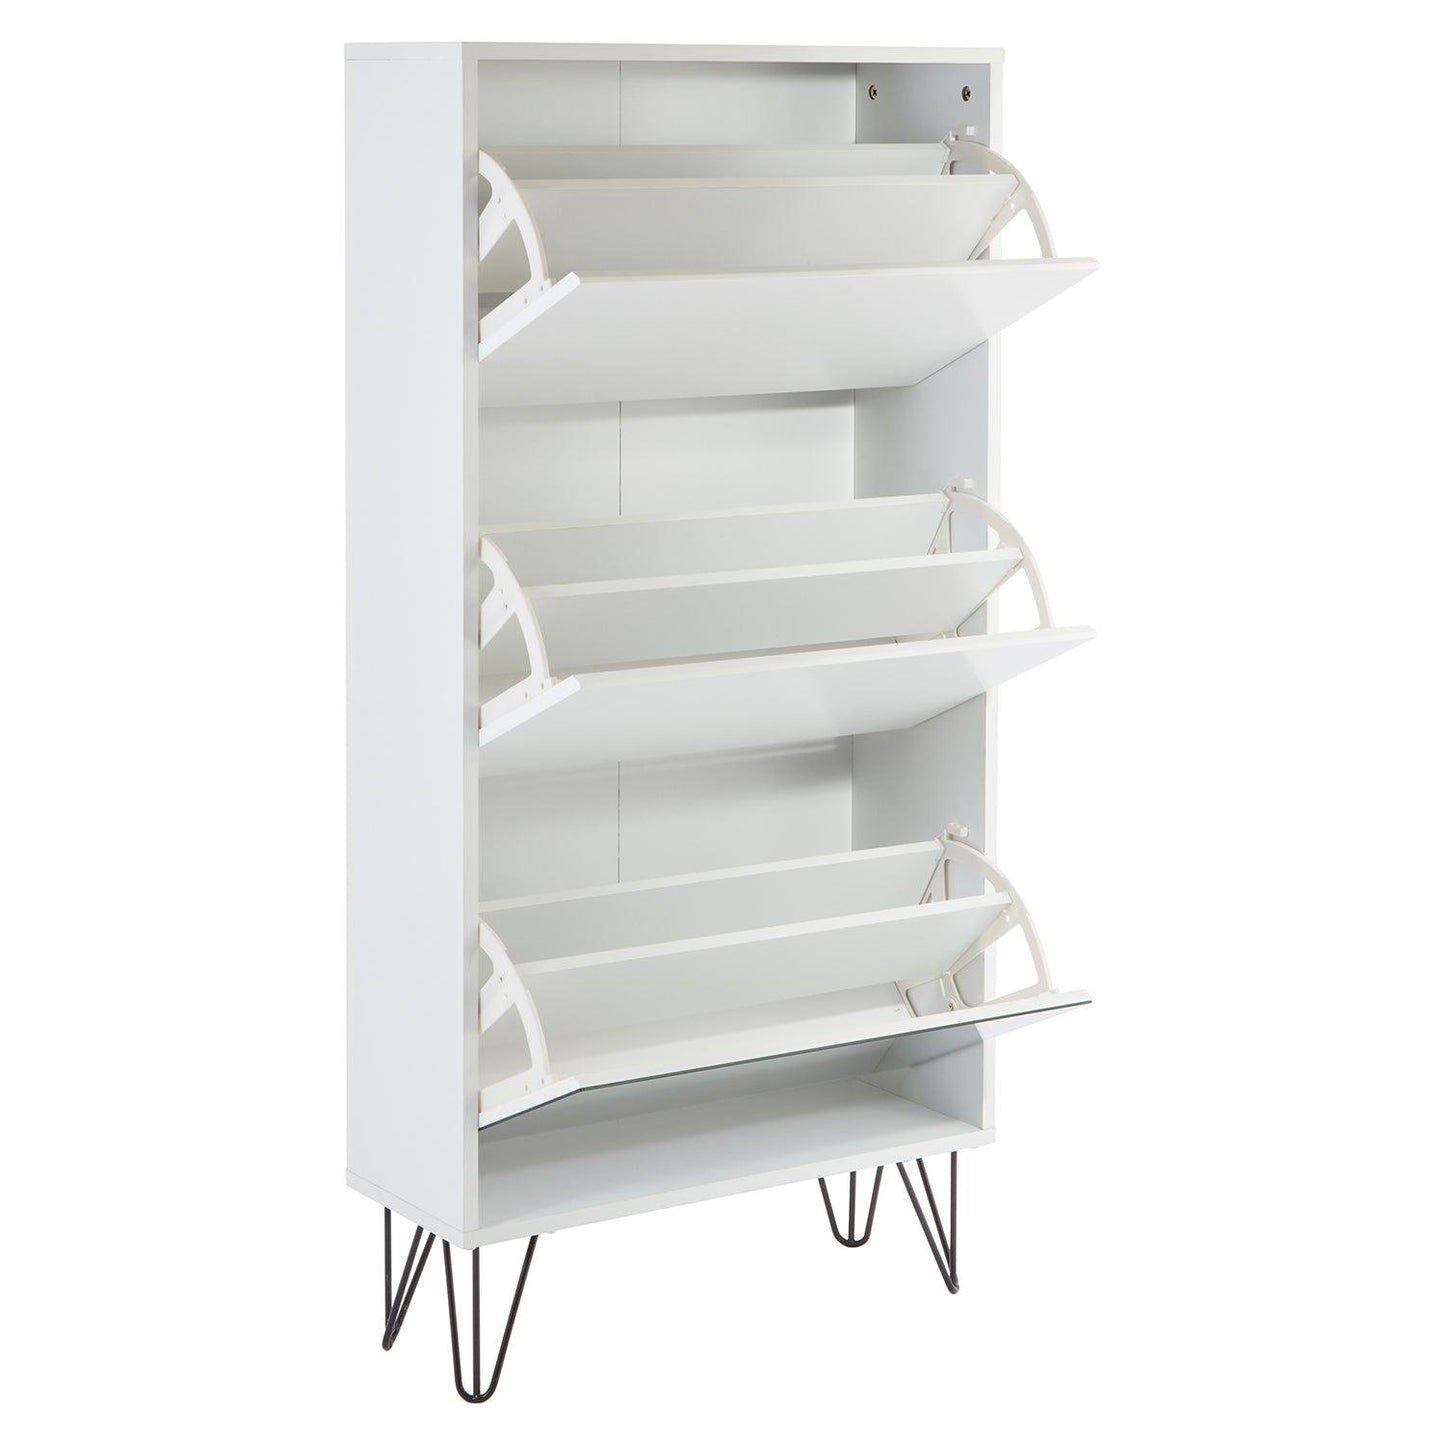 Anderson shoe cabinet - 3 door - white and white - Laura James